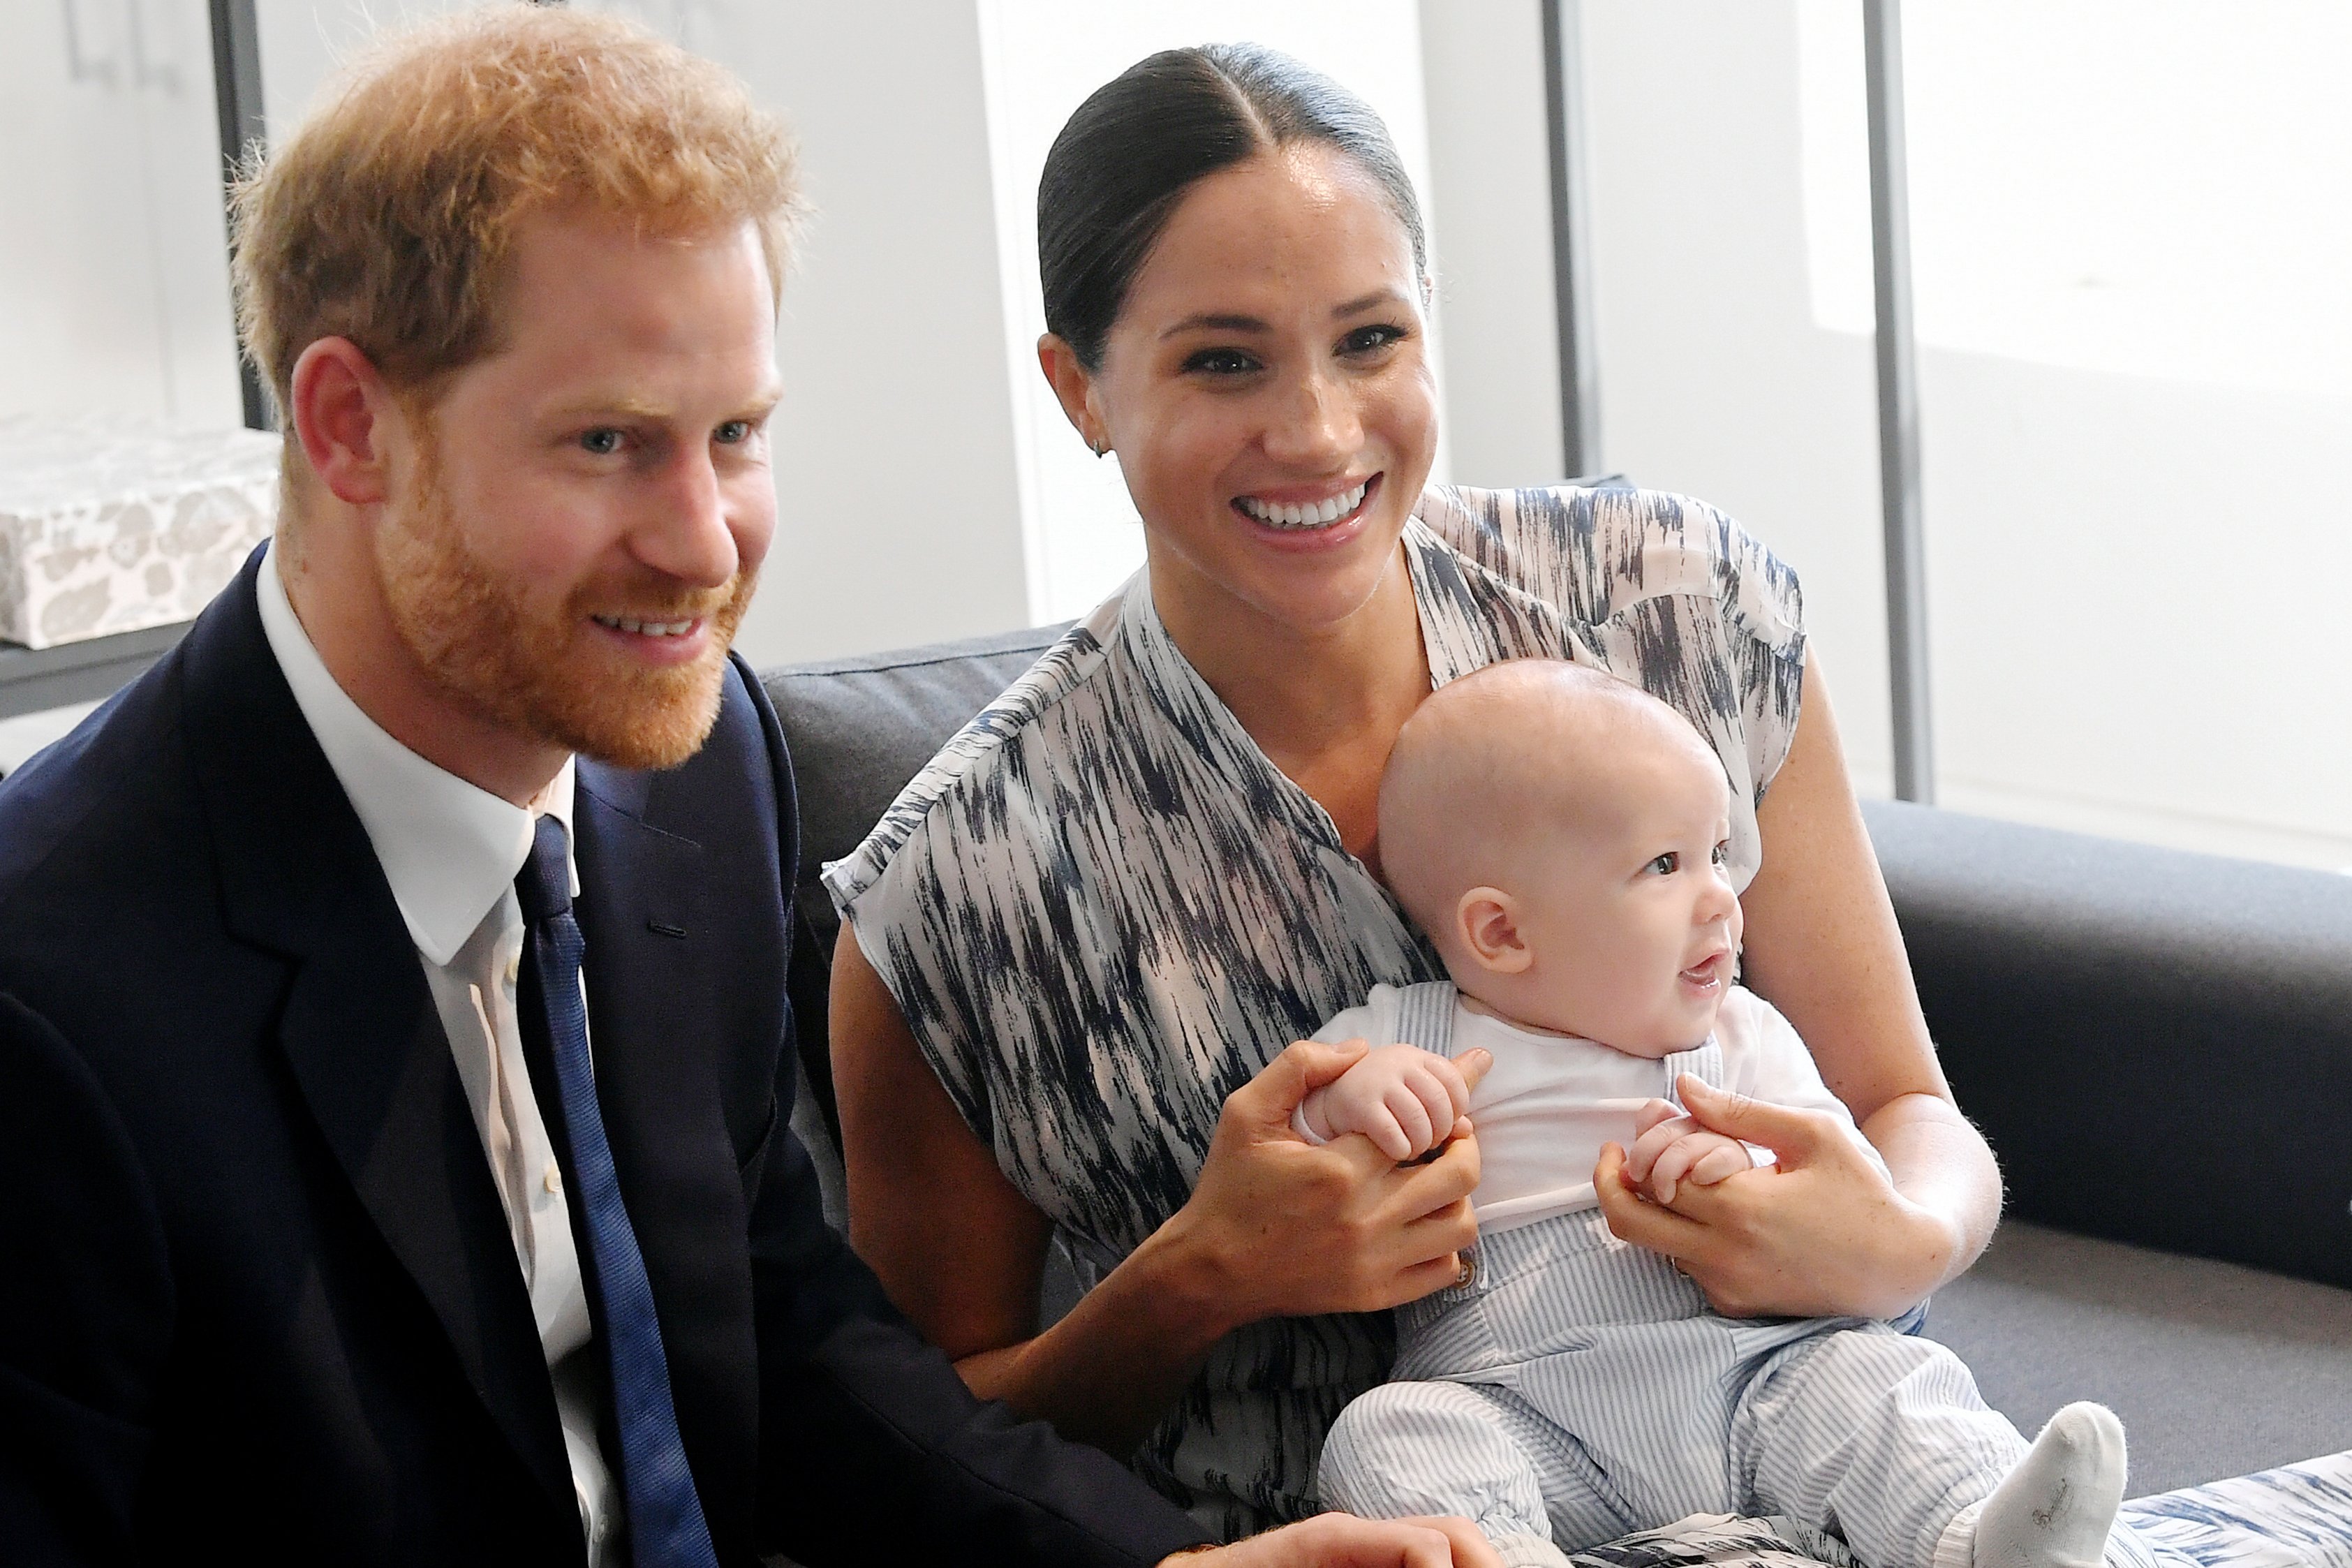 Prince Harry, Meghan Markle, and their son Archie Mountbatten-Windsor during their South African royal tour on September 25, 2019 | Photo: Getty Images